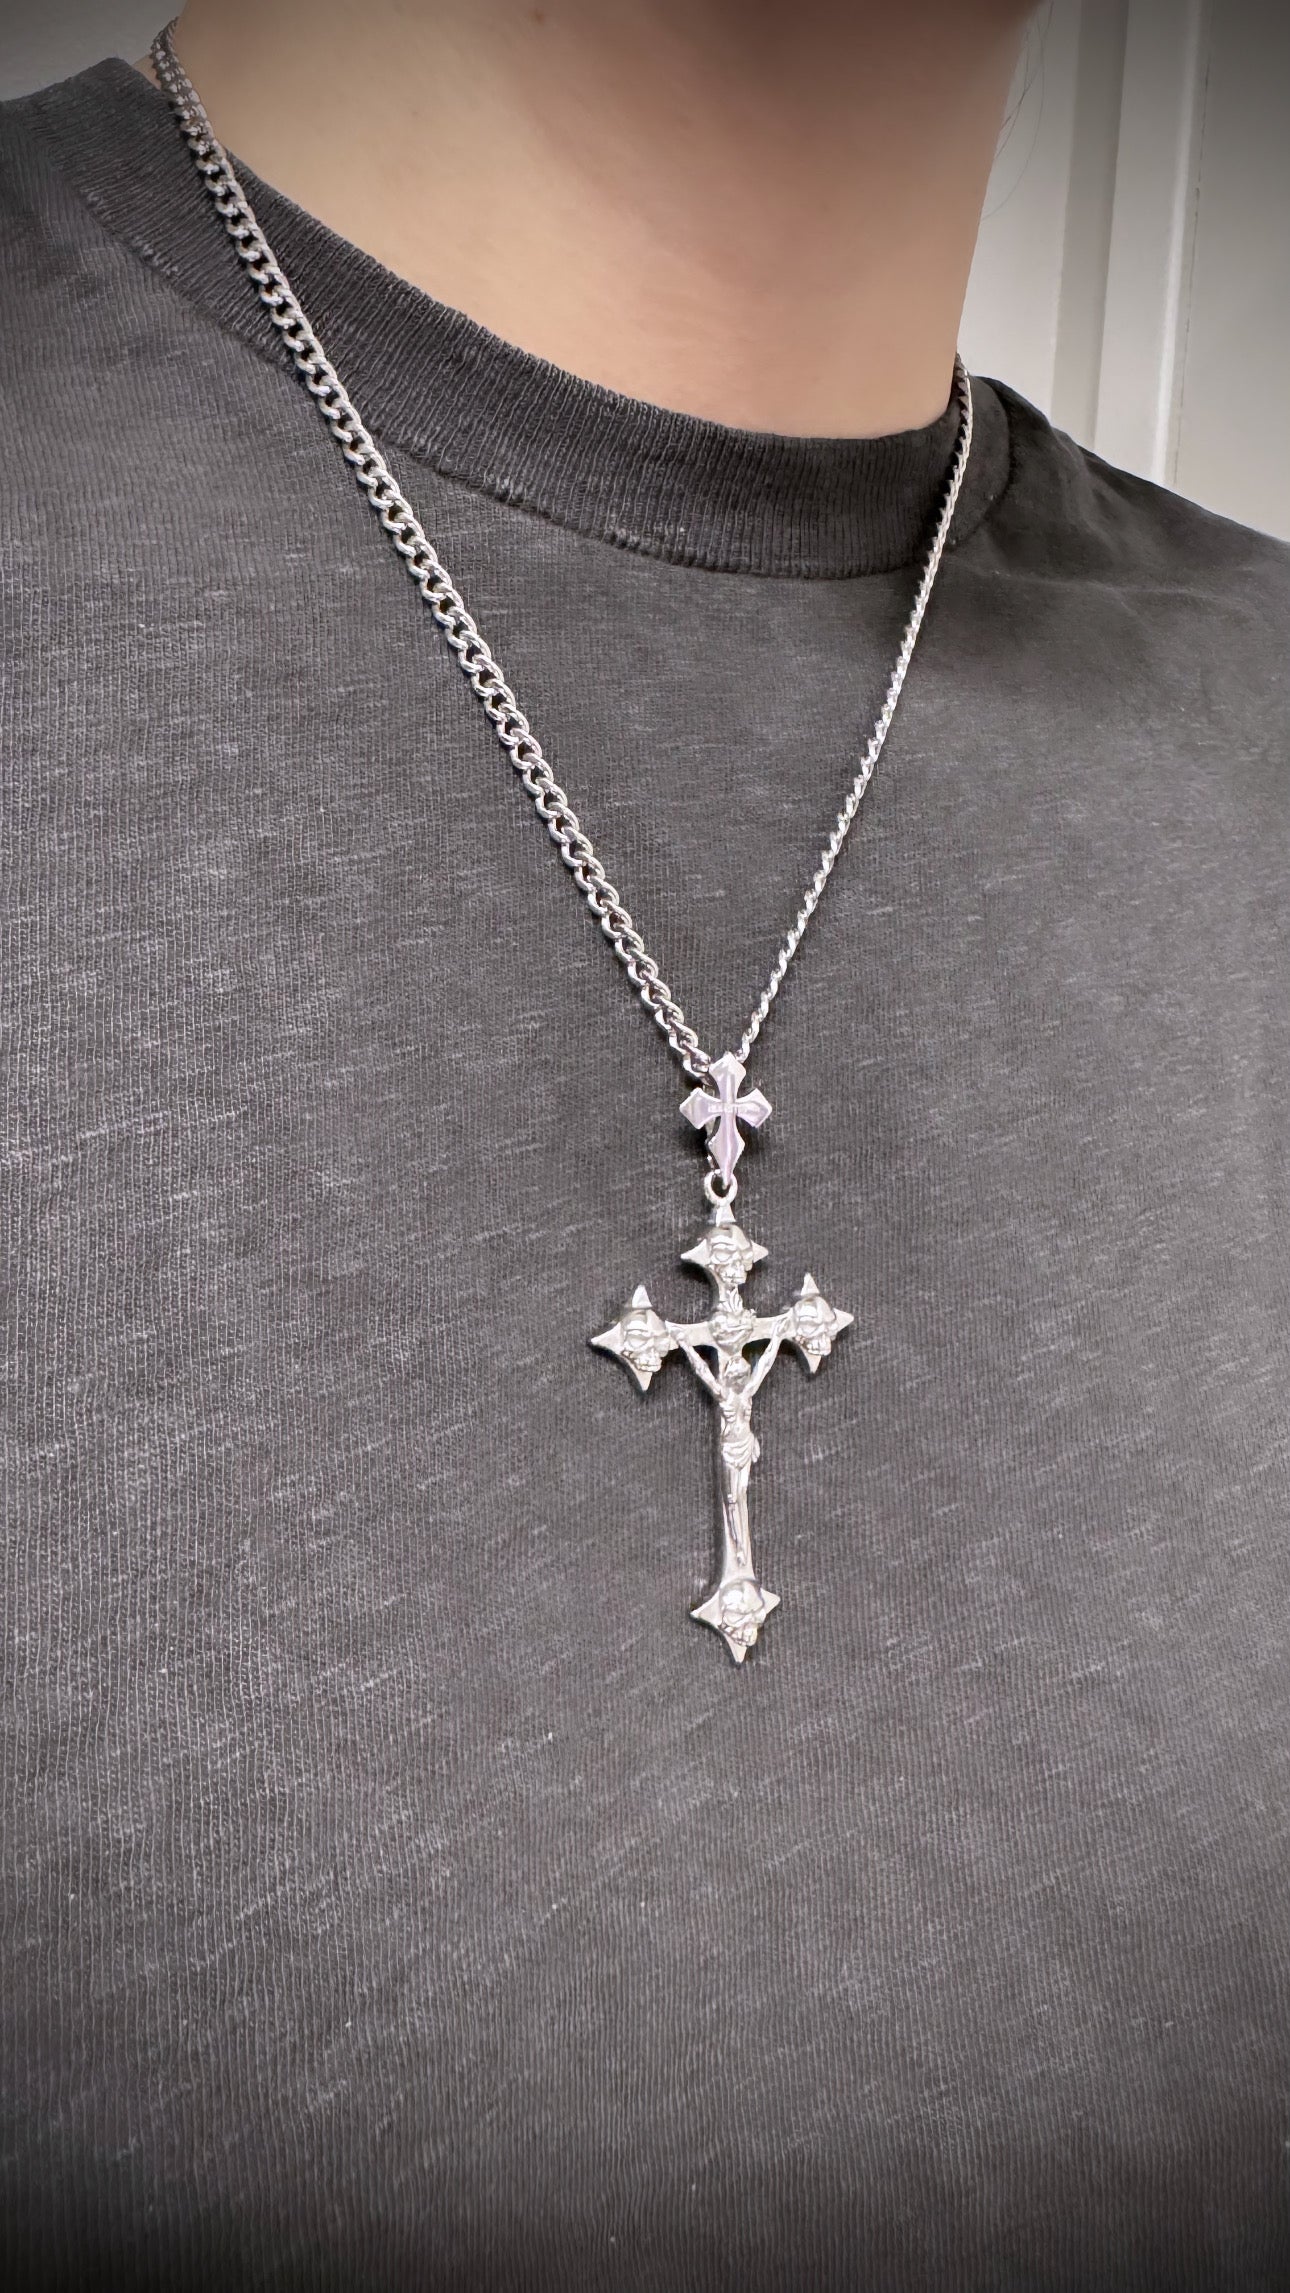 Necklace with crucifix pendant